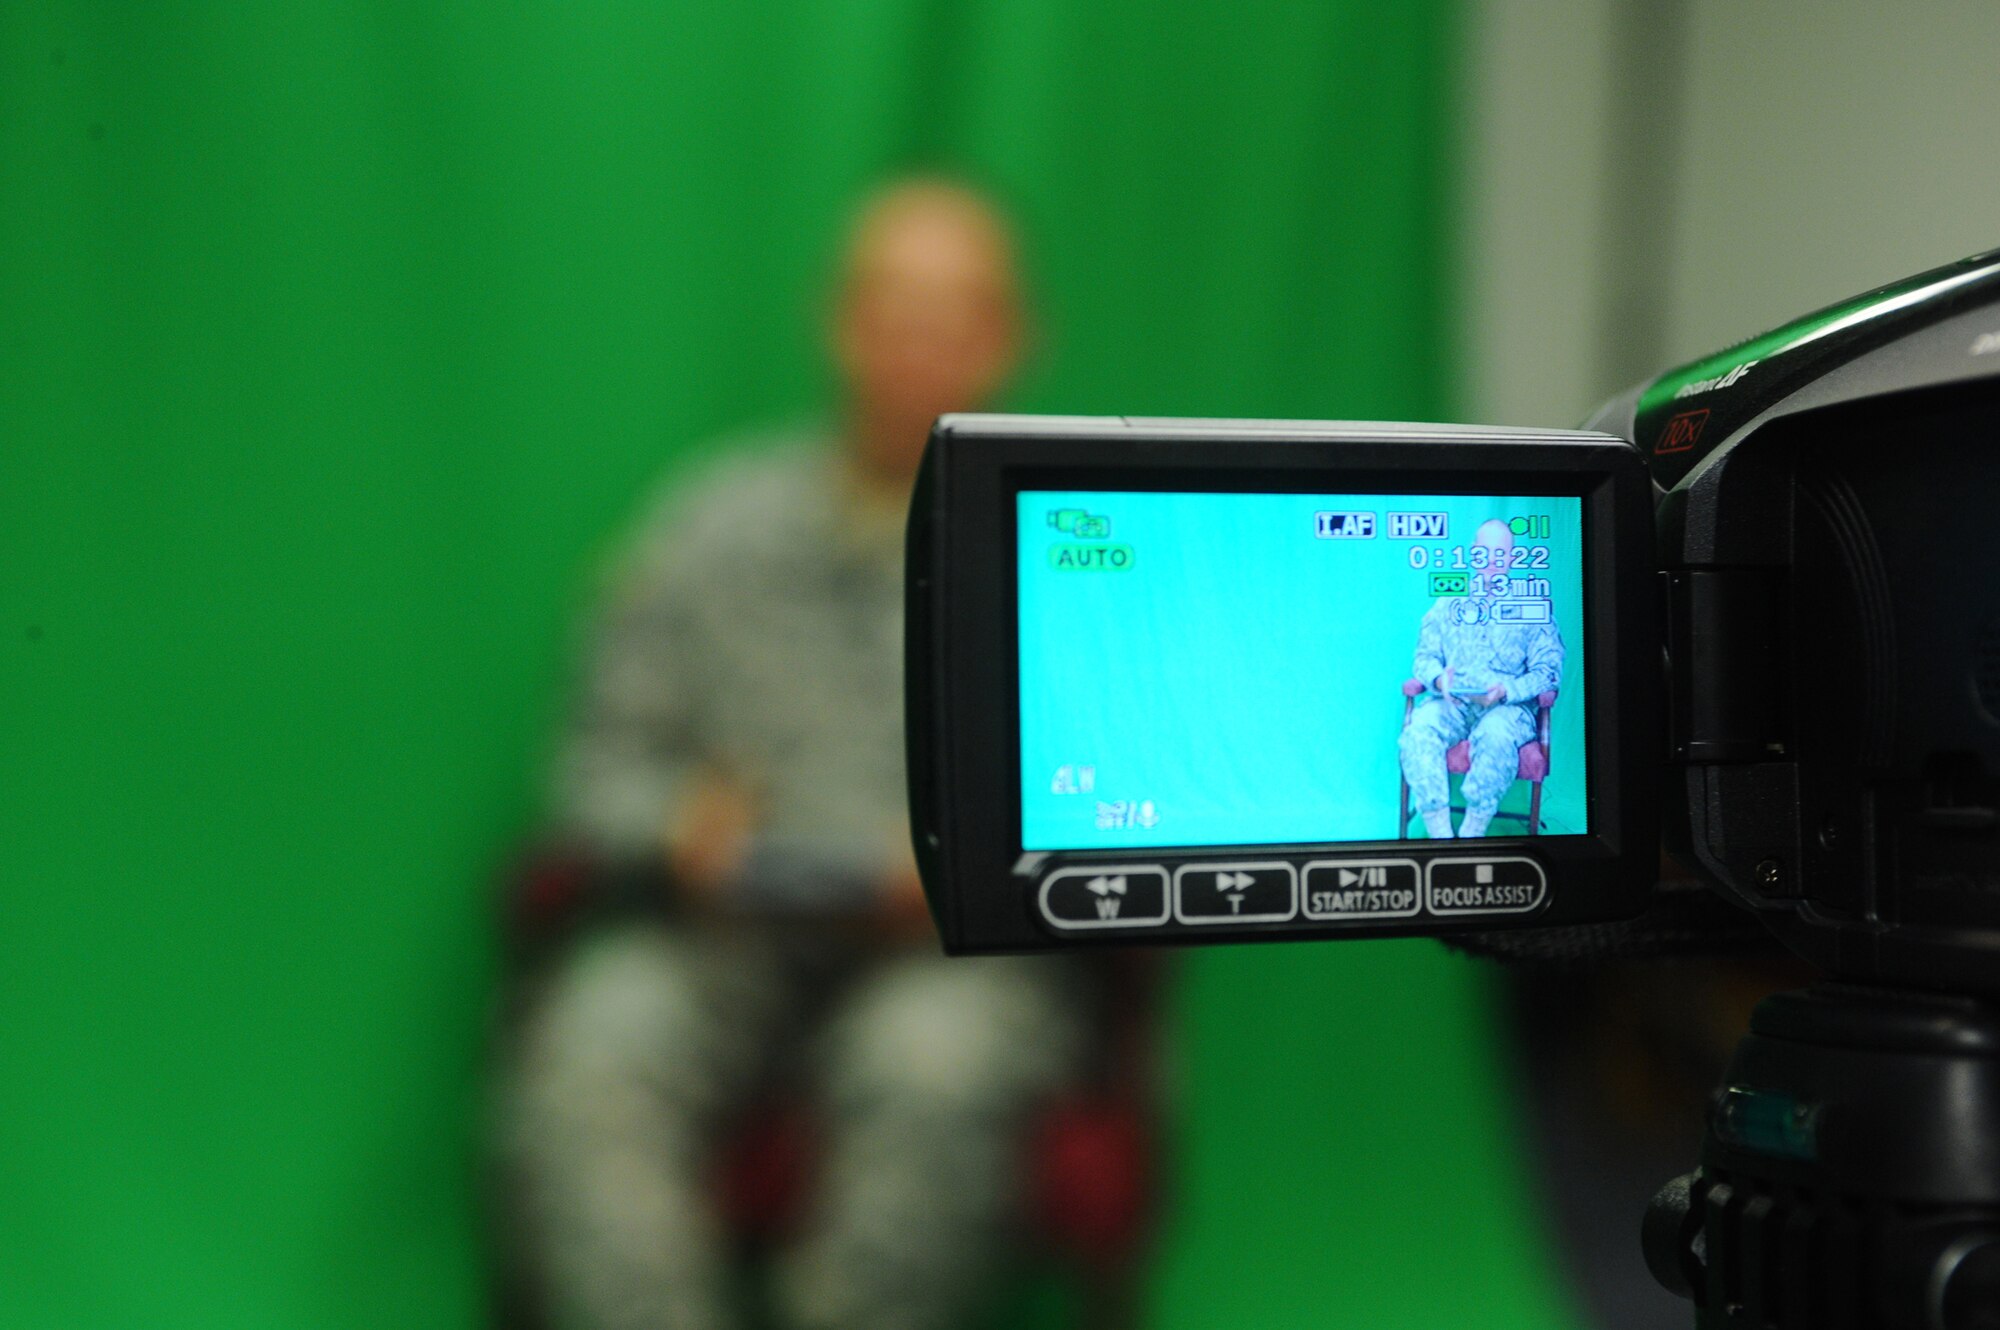 Staff Sgt. James Warren, 354th Fighter Wing chaplain's assistant, and his wife, Shelly, decided to put their video editing skills and altruism to use by videotaping deploying Airmen and Soldiers in the local area while they read bedtime stories to their children free of charge. Pictured here, Army Sgt. 1st Class Maynard Hinkle, Task Force Saber, 6th Squadron, 17th Calvary, reads The Cat in the Hat July 16, 2008 at Fort Wainwright. Sergeant Hinkle has been on many deployments, including Afghanistan and Bosnia and has never, until now, had the capability to communicate via video recording to his children. (U.S. Air Force photo by Airman 1st Class Jonathan Snyder)